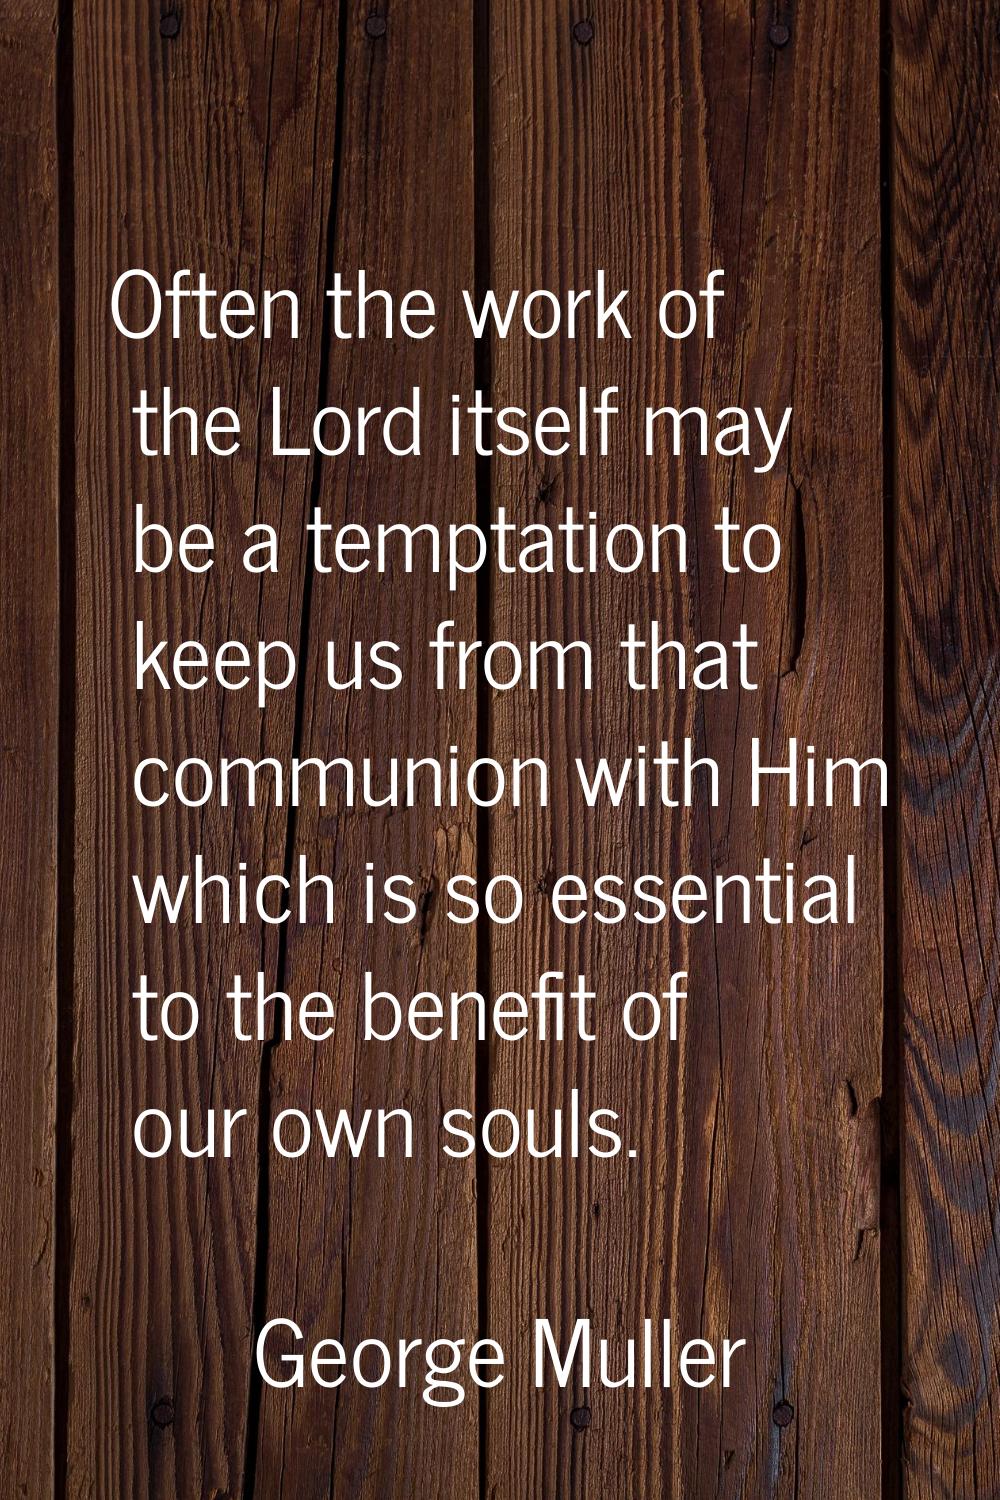 Often the work of the Lord itself may be a temptation to keep us from that communion with Him which